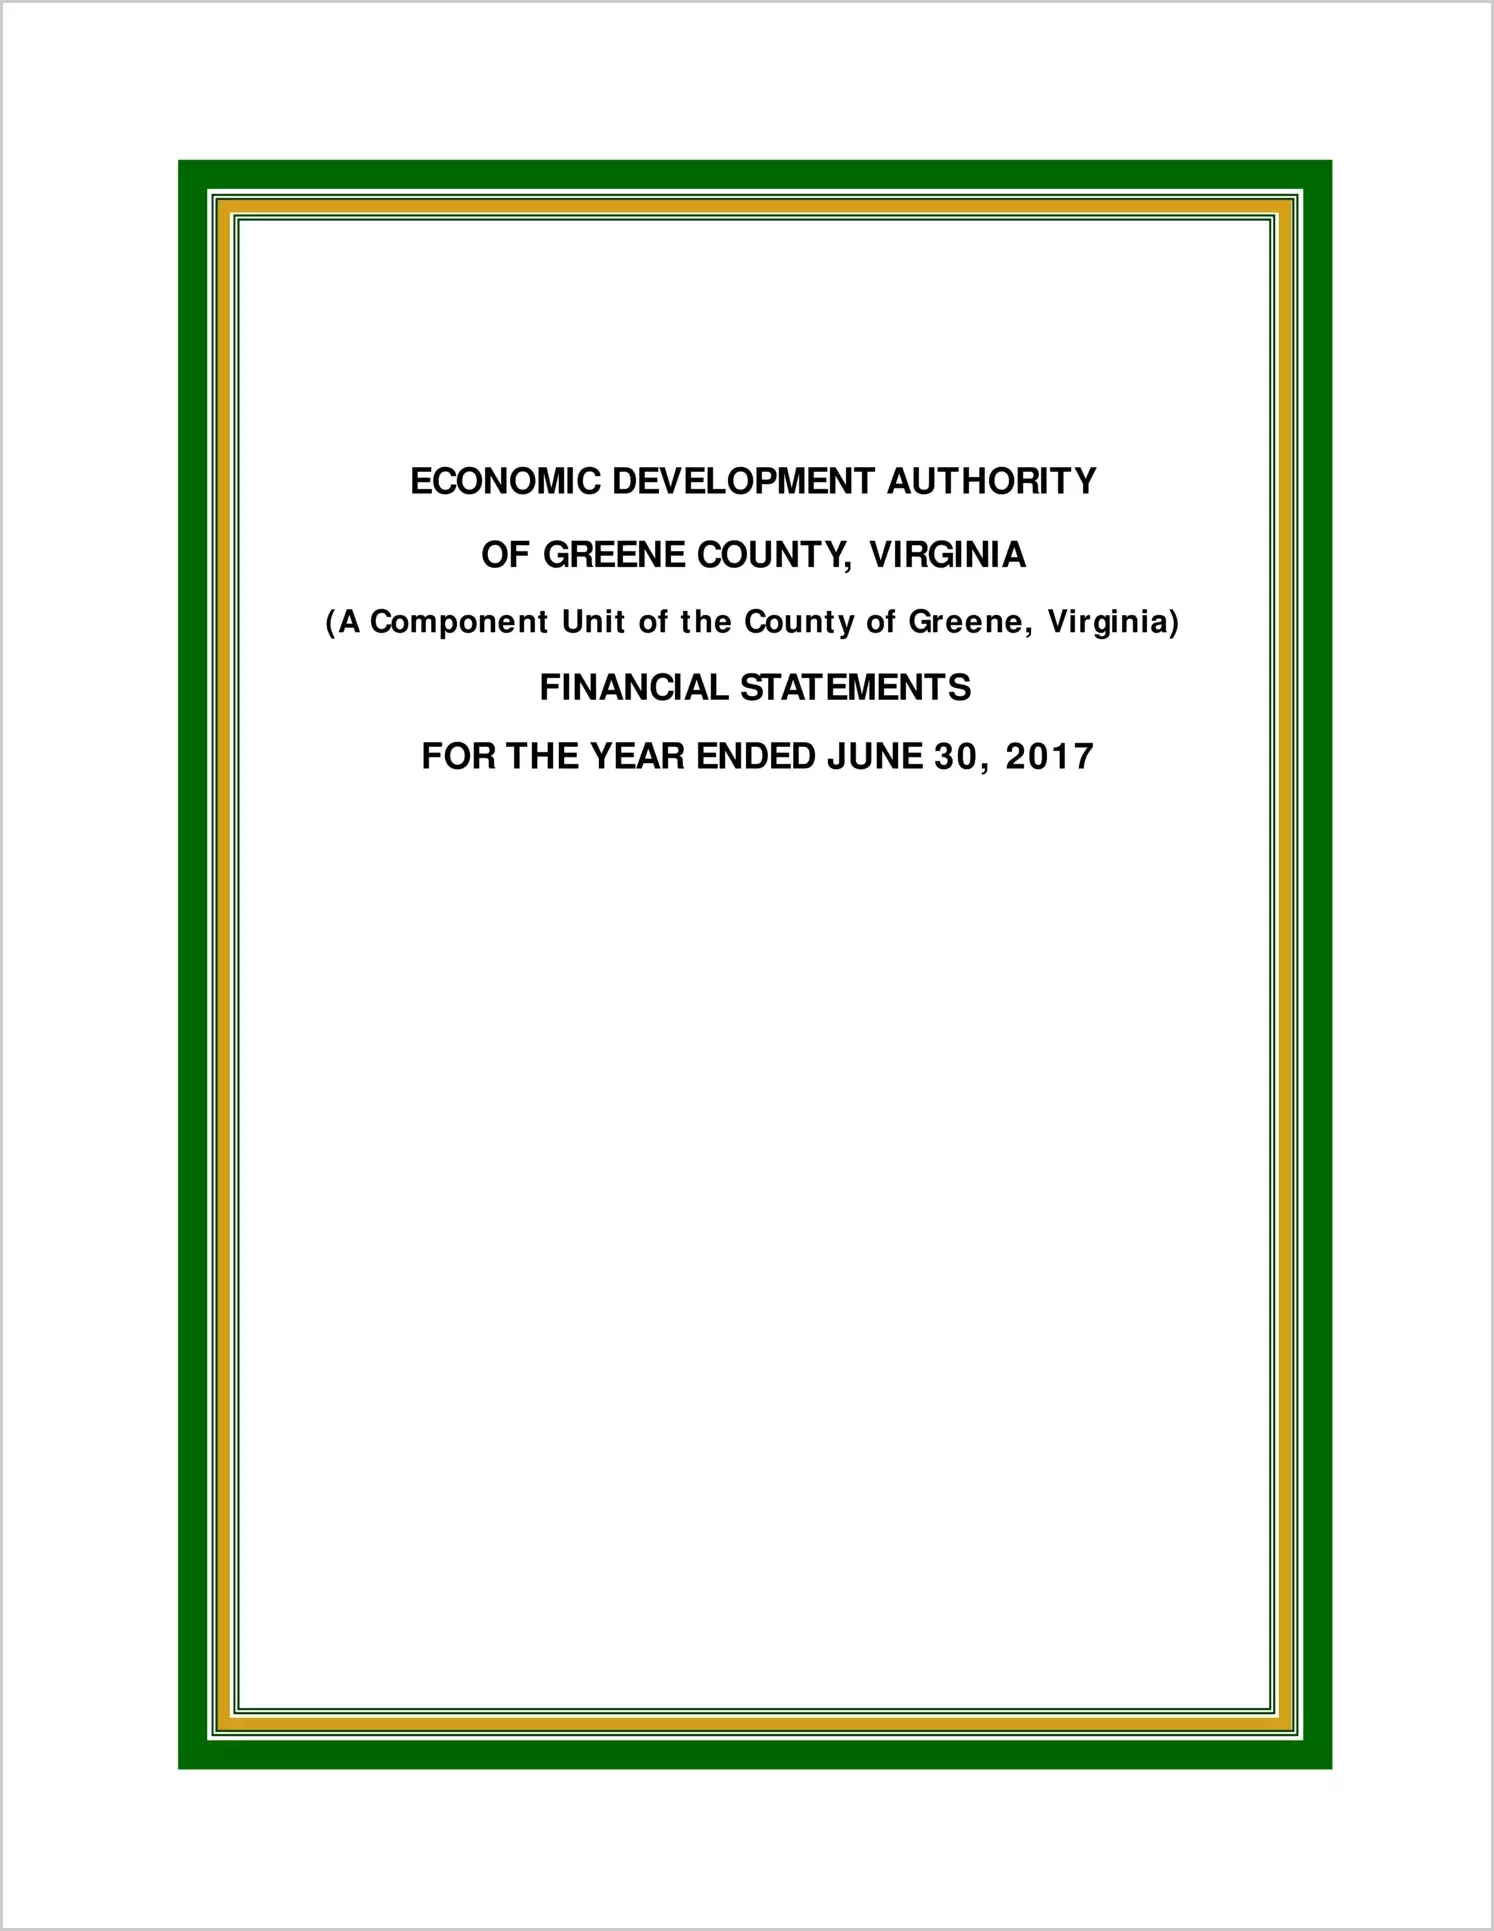 2017 ABC/Other Annual Financial Report  for Greene Economic Development Authority